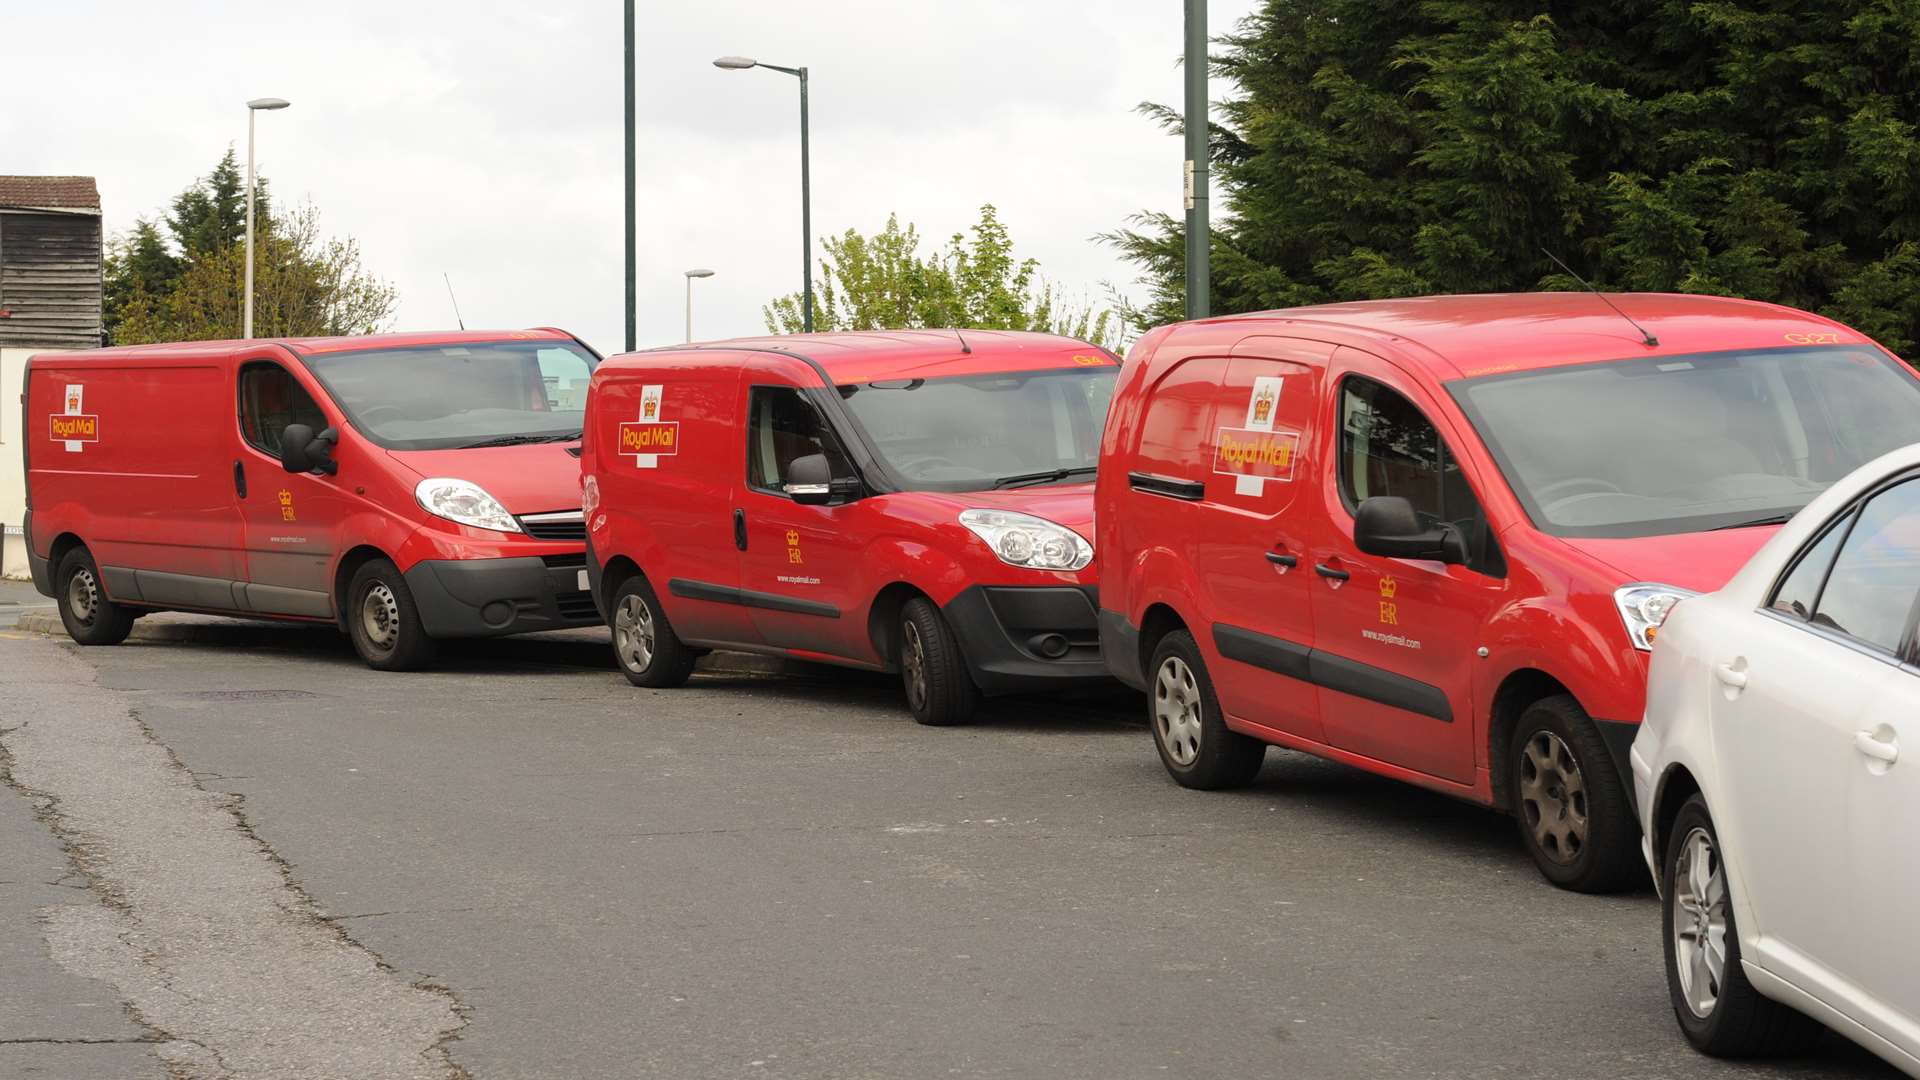 Colleagues followed the funeral procession in their Royal Mail vans